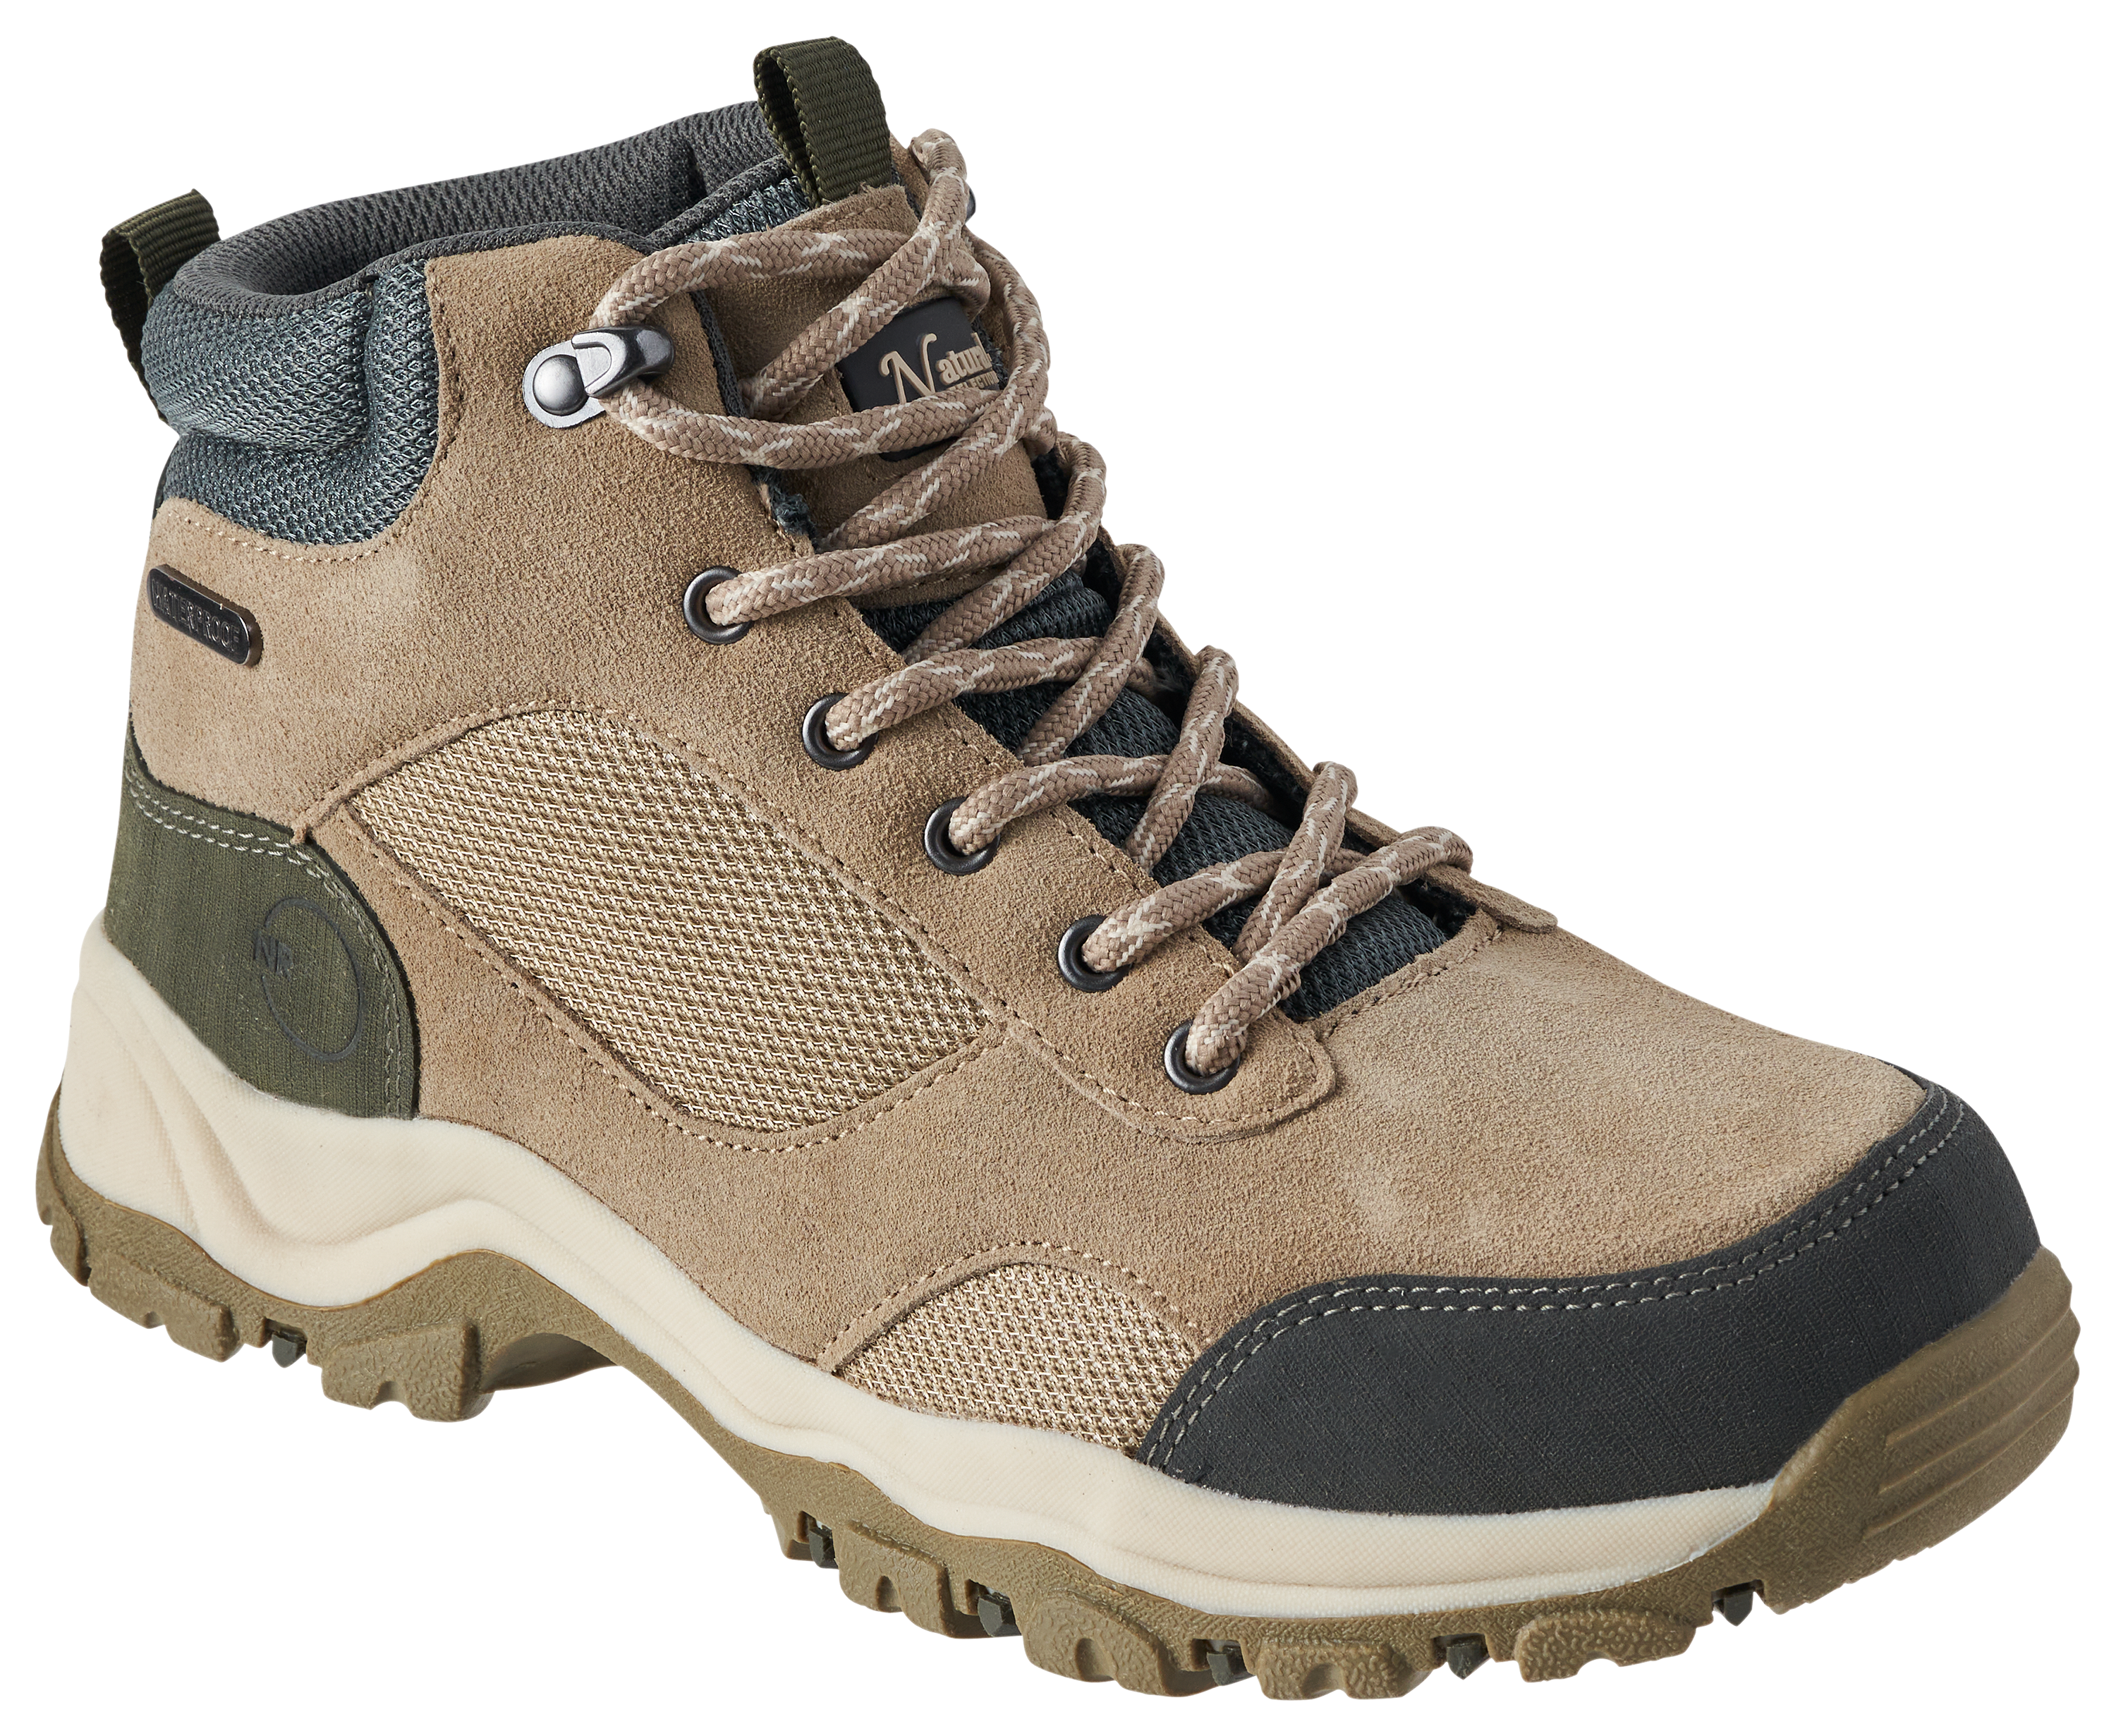 Natural Reflections Skyline II Mid Waterproof Hiking Boots for Ladies - Tan/Charcoal - 9.5M